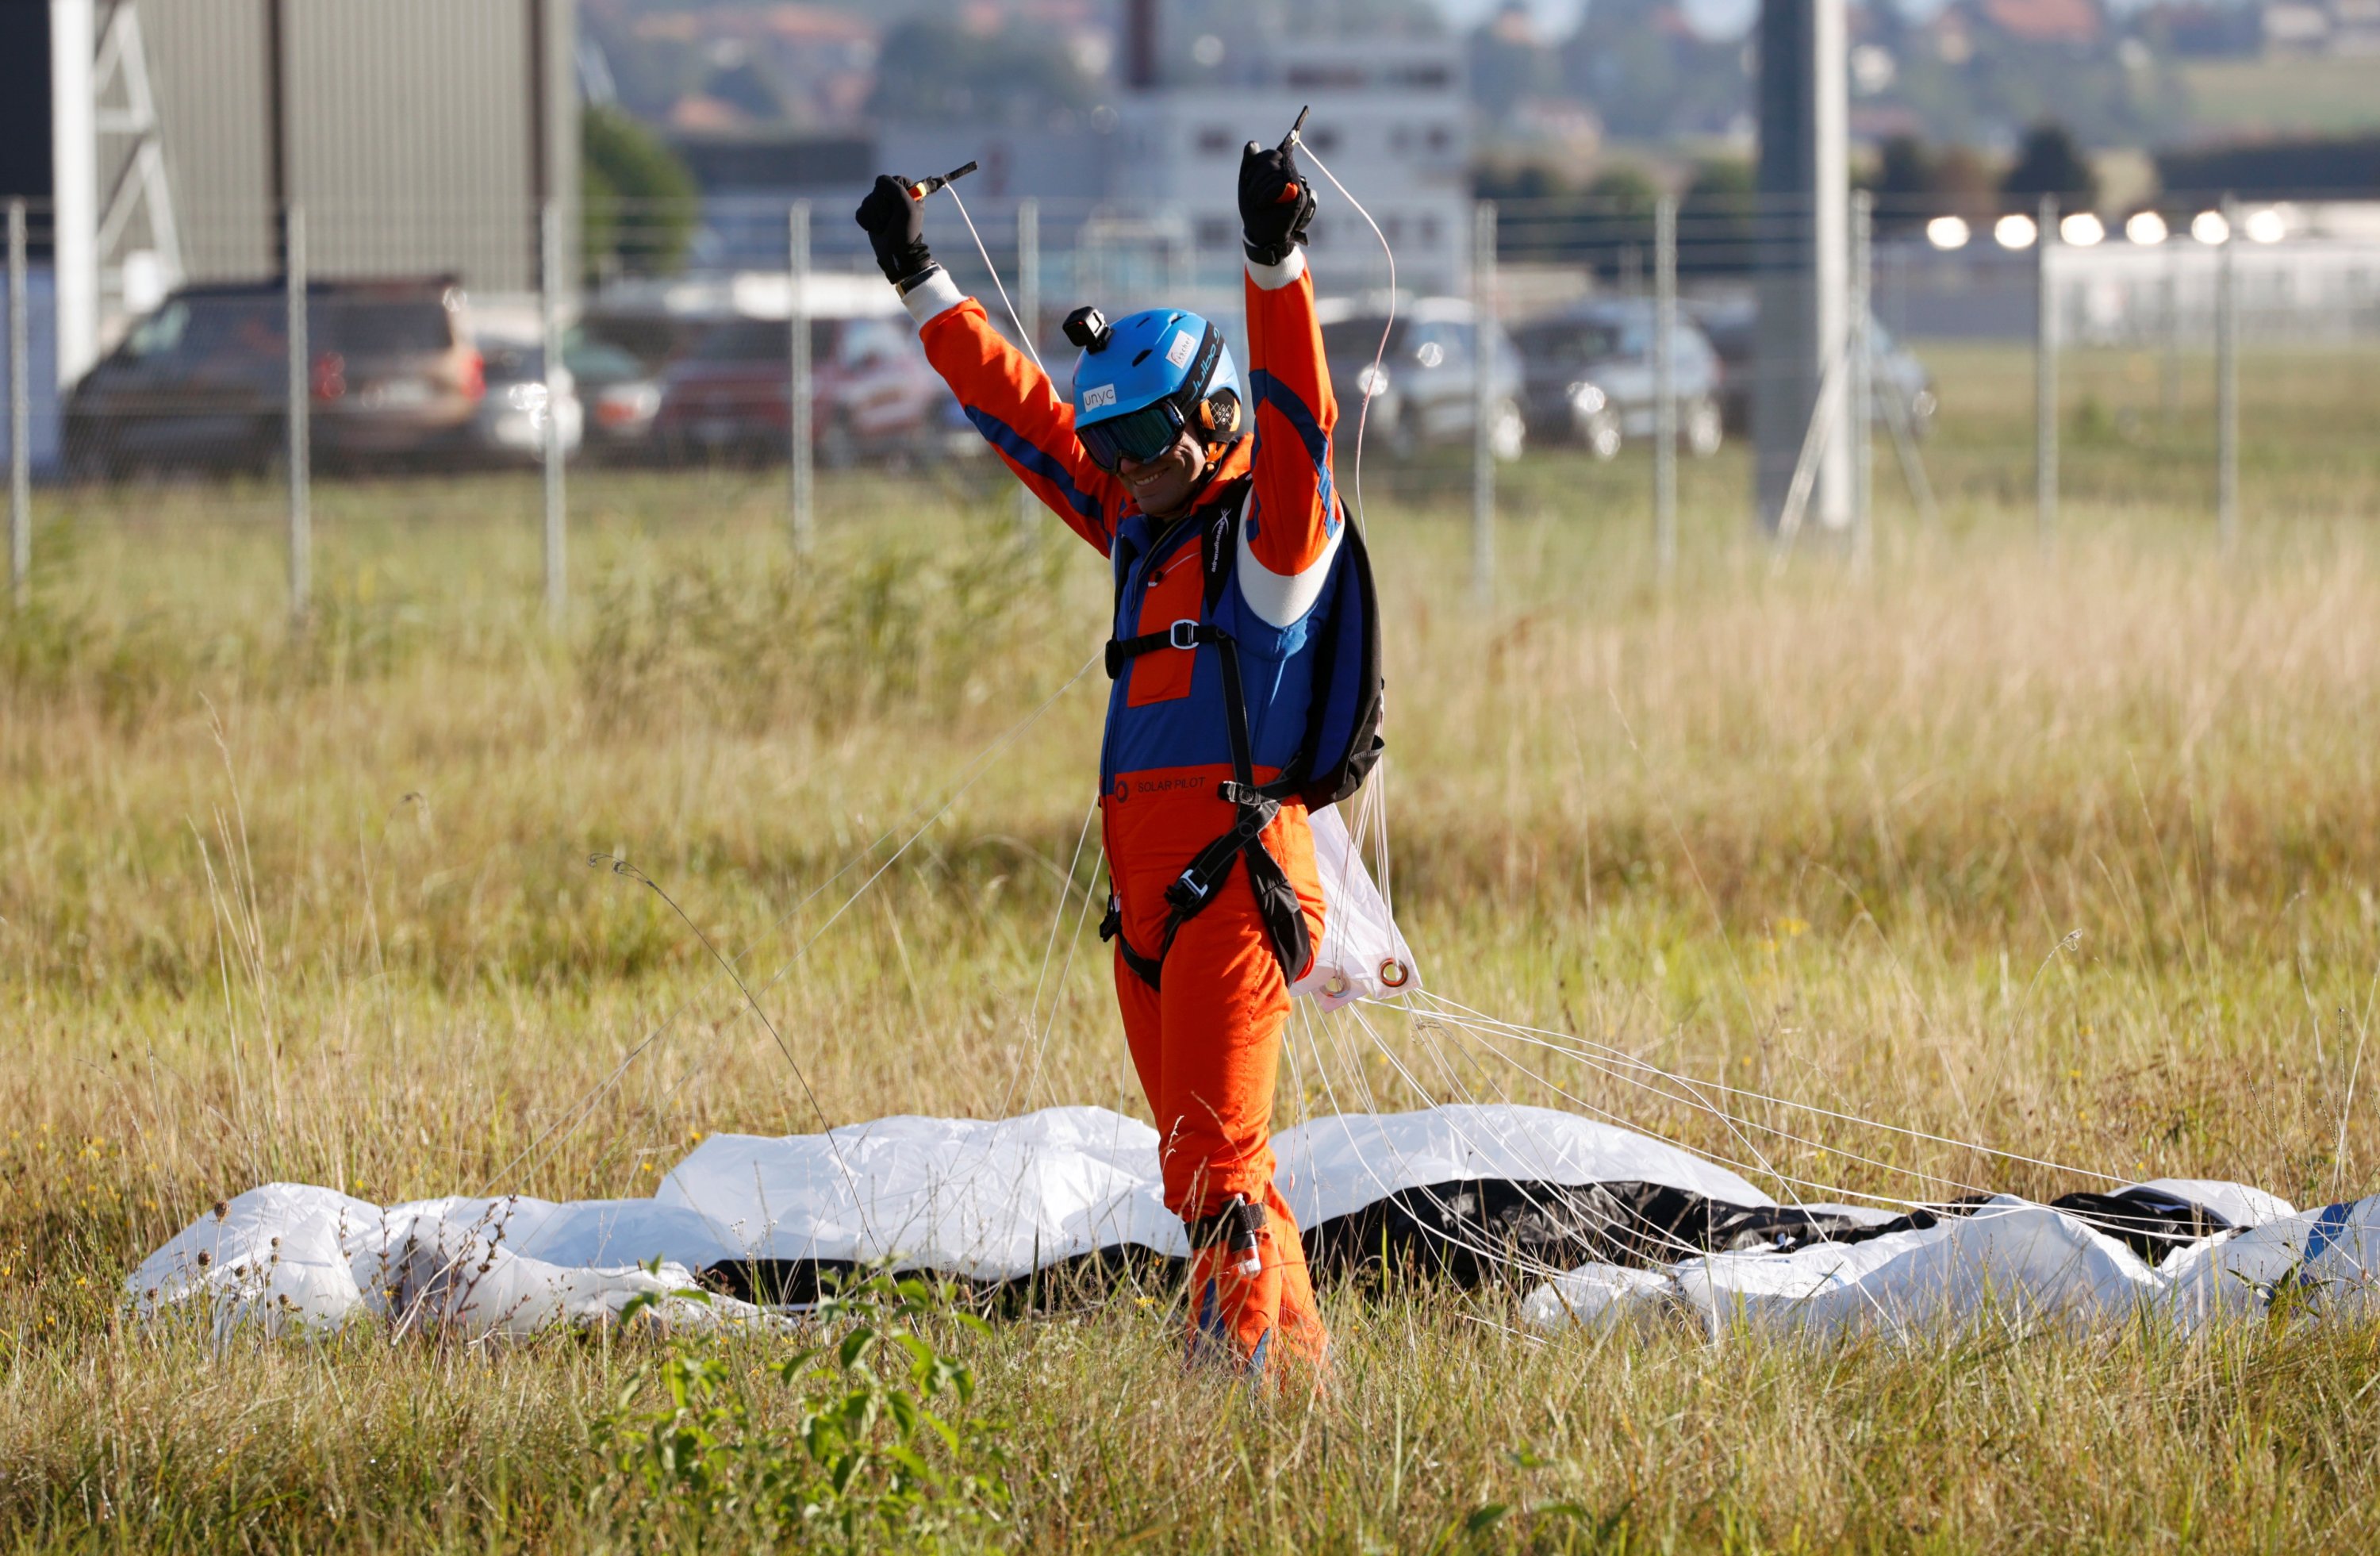 Project instigator Raphael Domjan reacts upon landing after he jumped with a parachute from the SolarStratos aircraft, a solar-powered two-seater aircraft, in Payerne, Switzerland August 25, 2020. REUTERS/Denis Balibouse